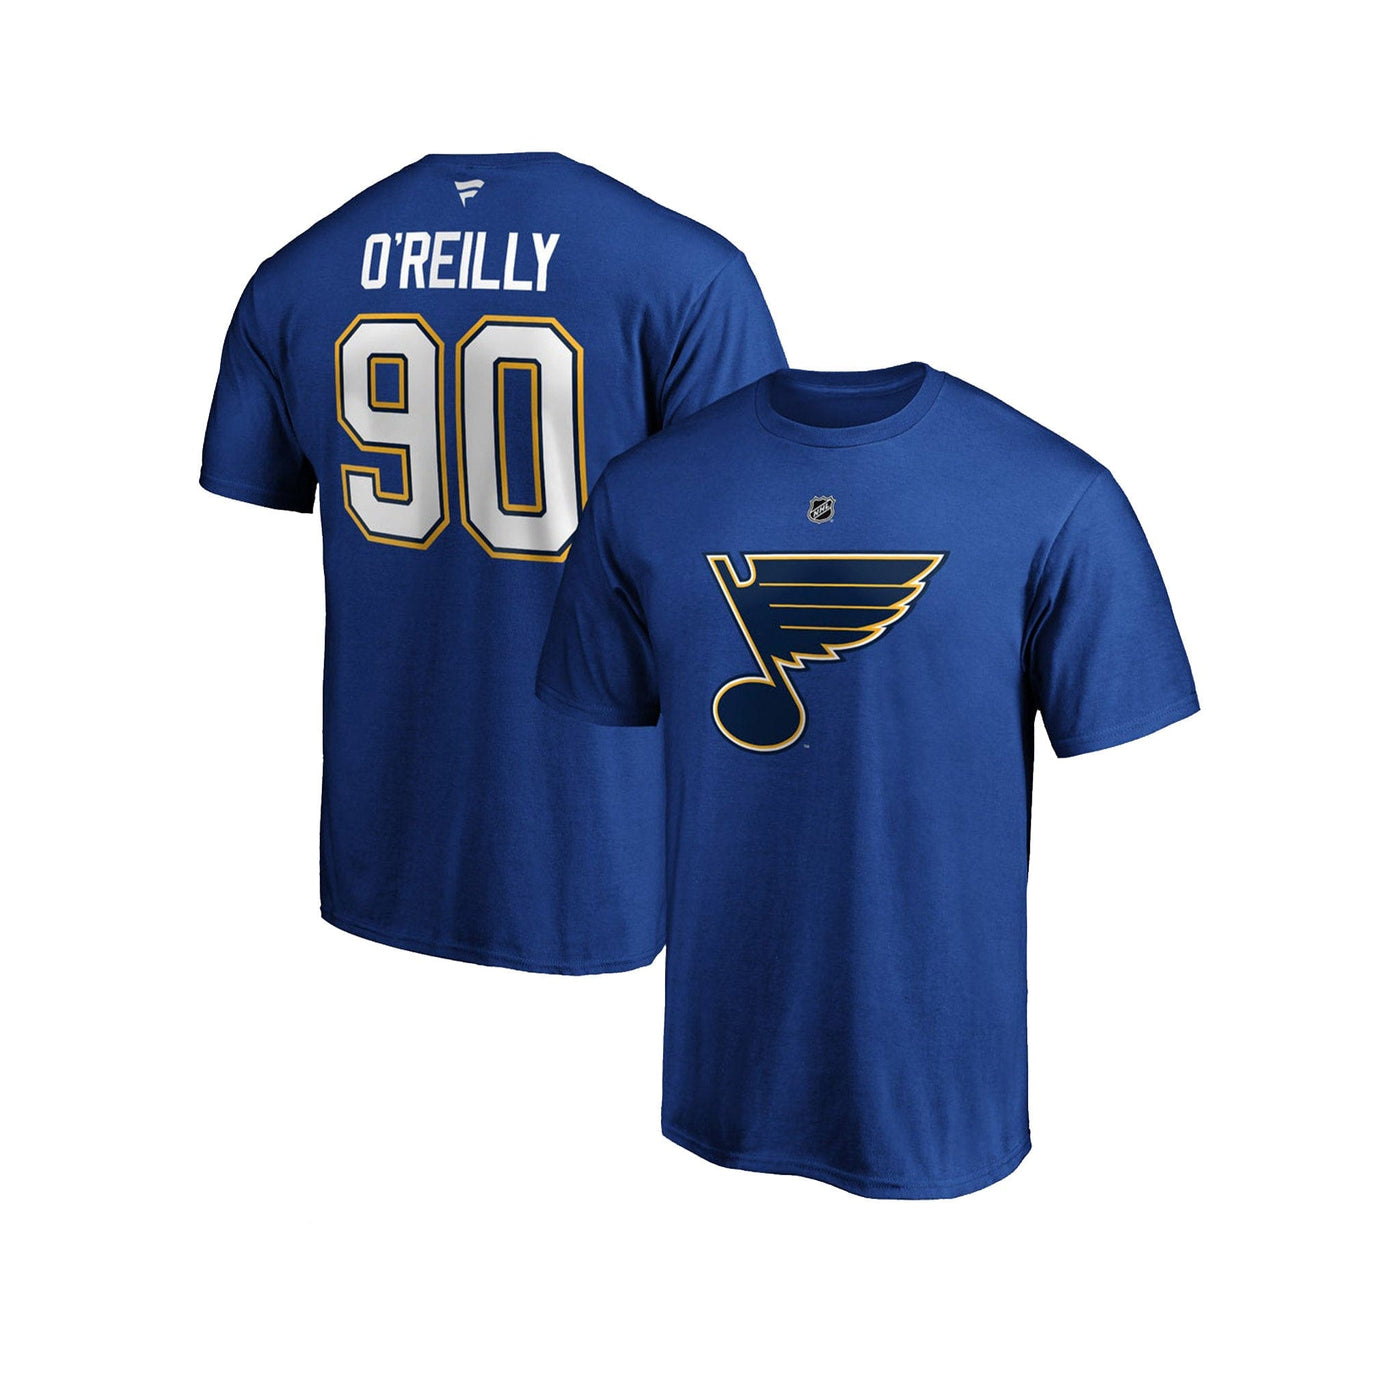 St. Louis Blues Fanatics Authentic Name & Number Mens Shirt - Ryan O'Reilly